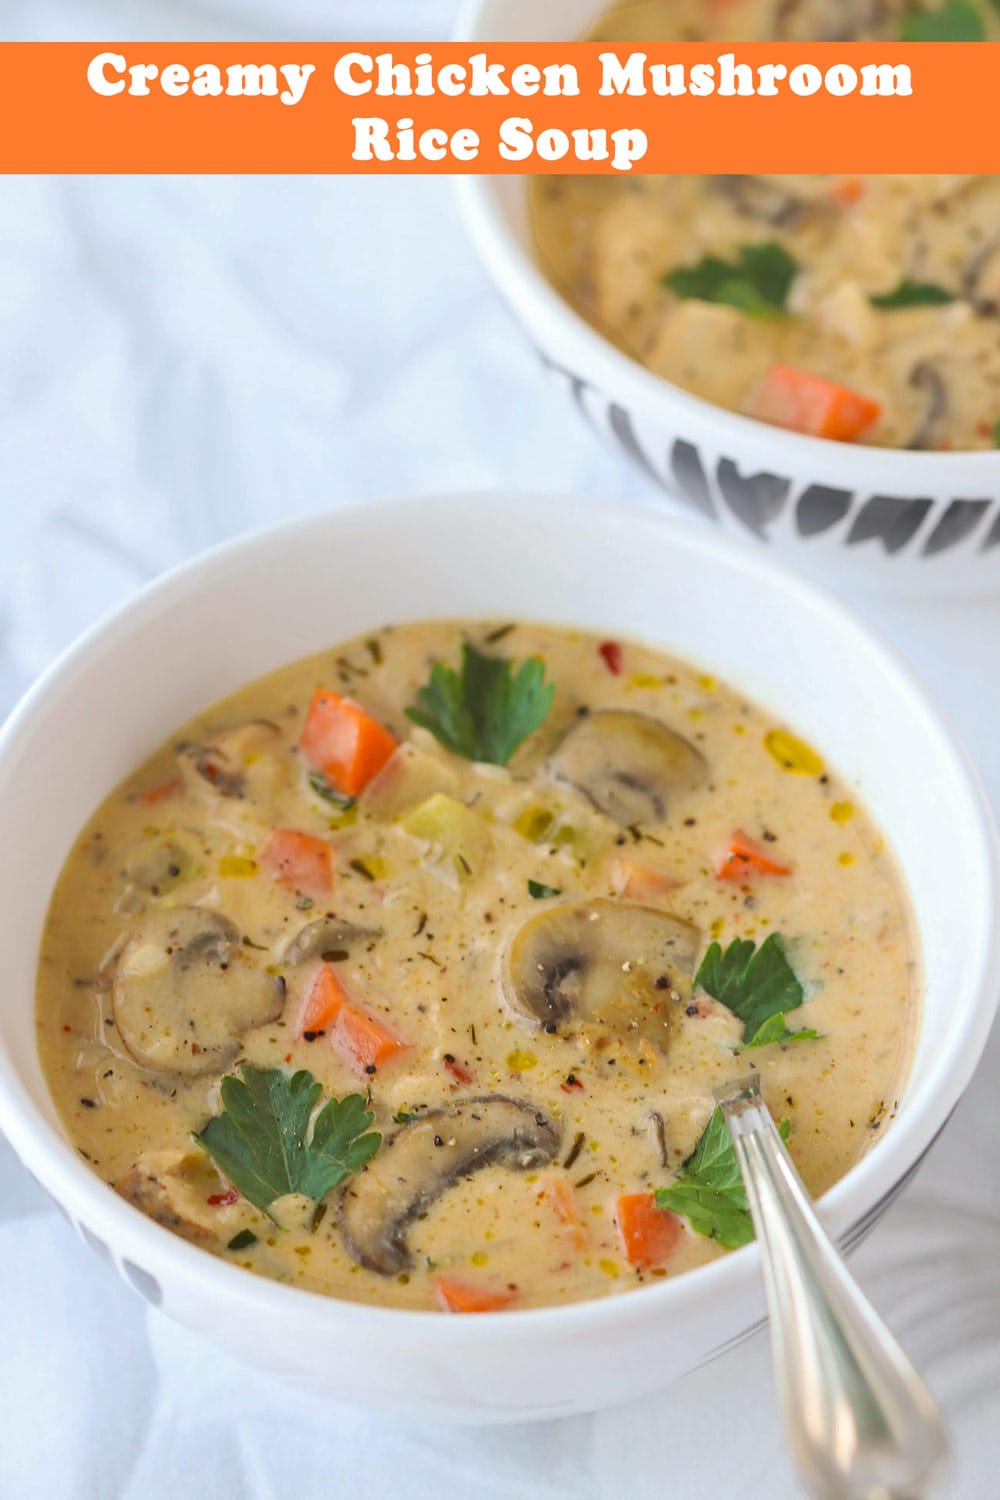 Creamy Chicken Mushroom Rice Soup - That Spicy Chick